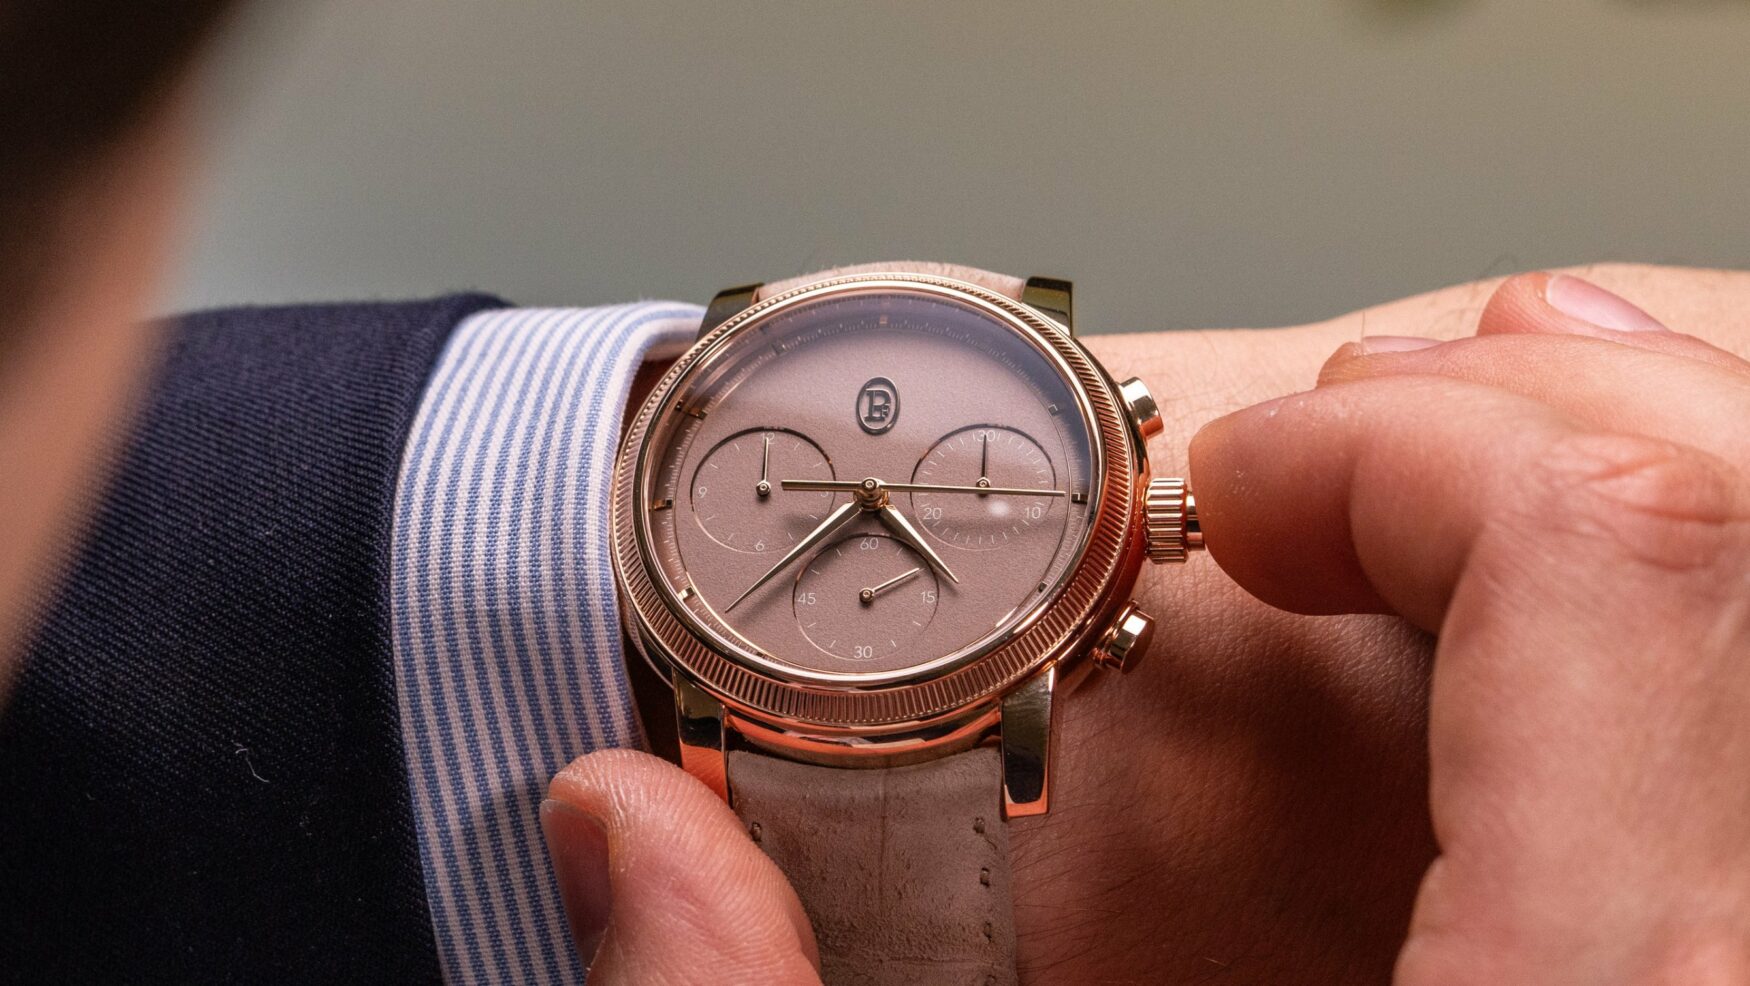 The Parmigiani Fleurier Toric Chronographe Rattrapante is a gilded return to brand origins